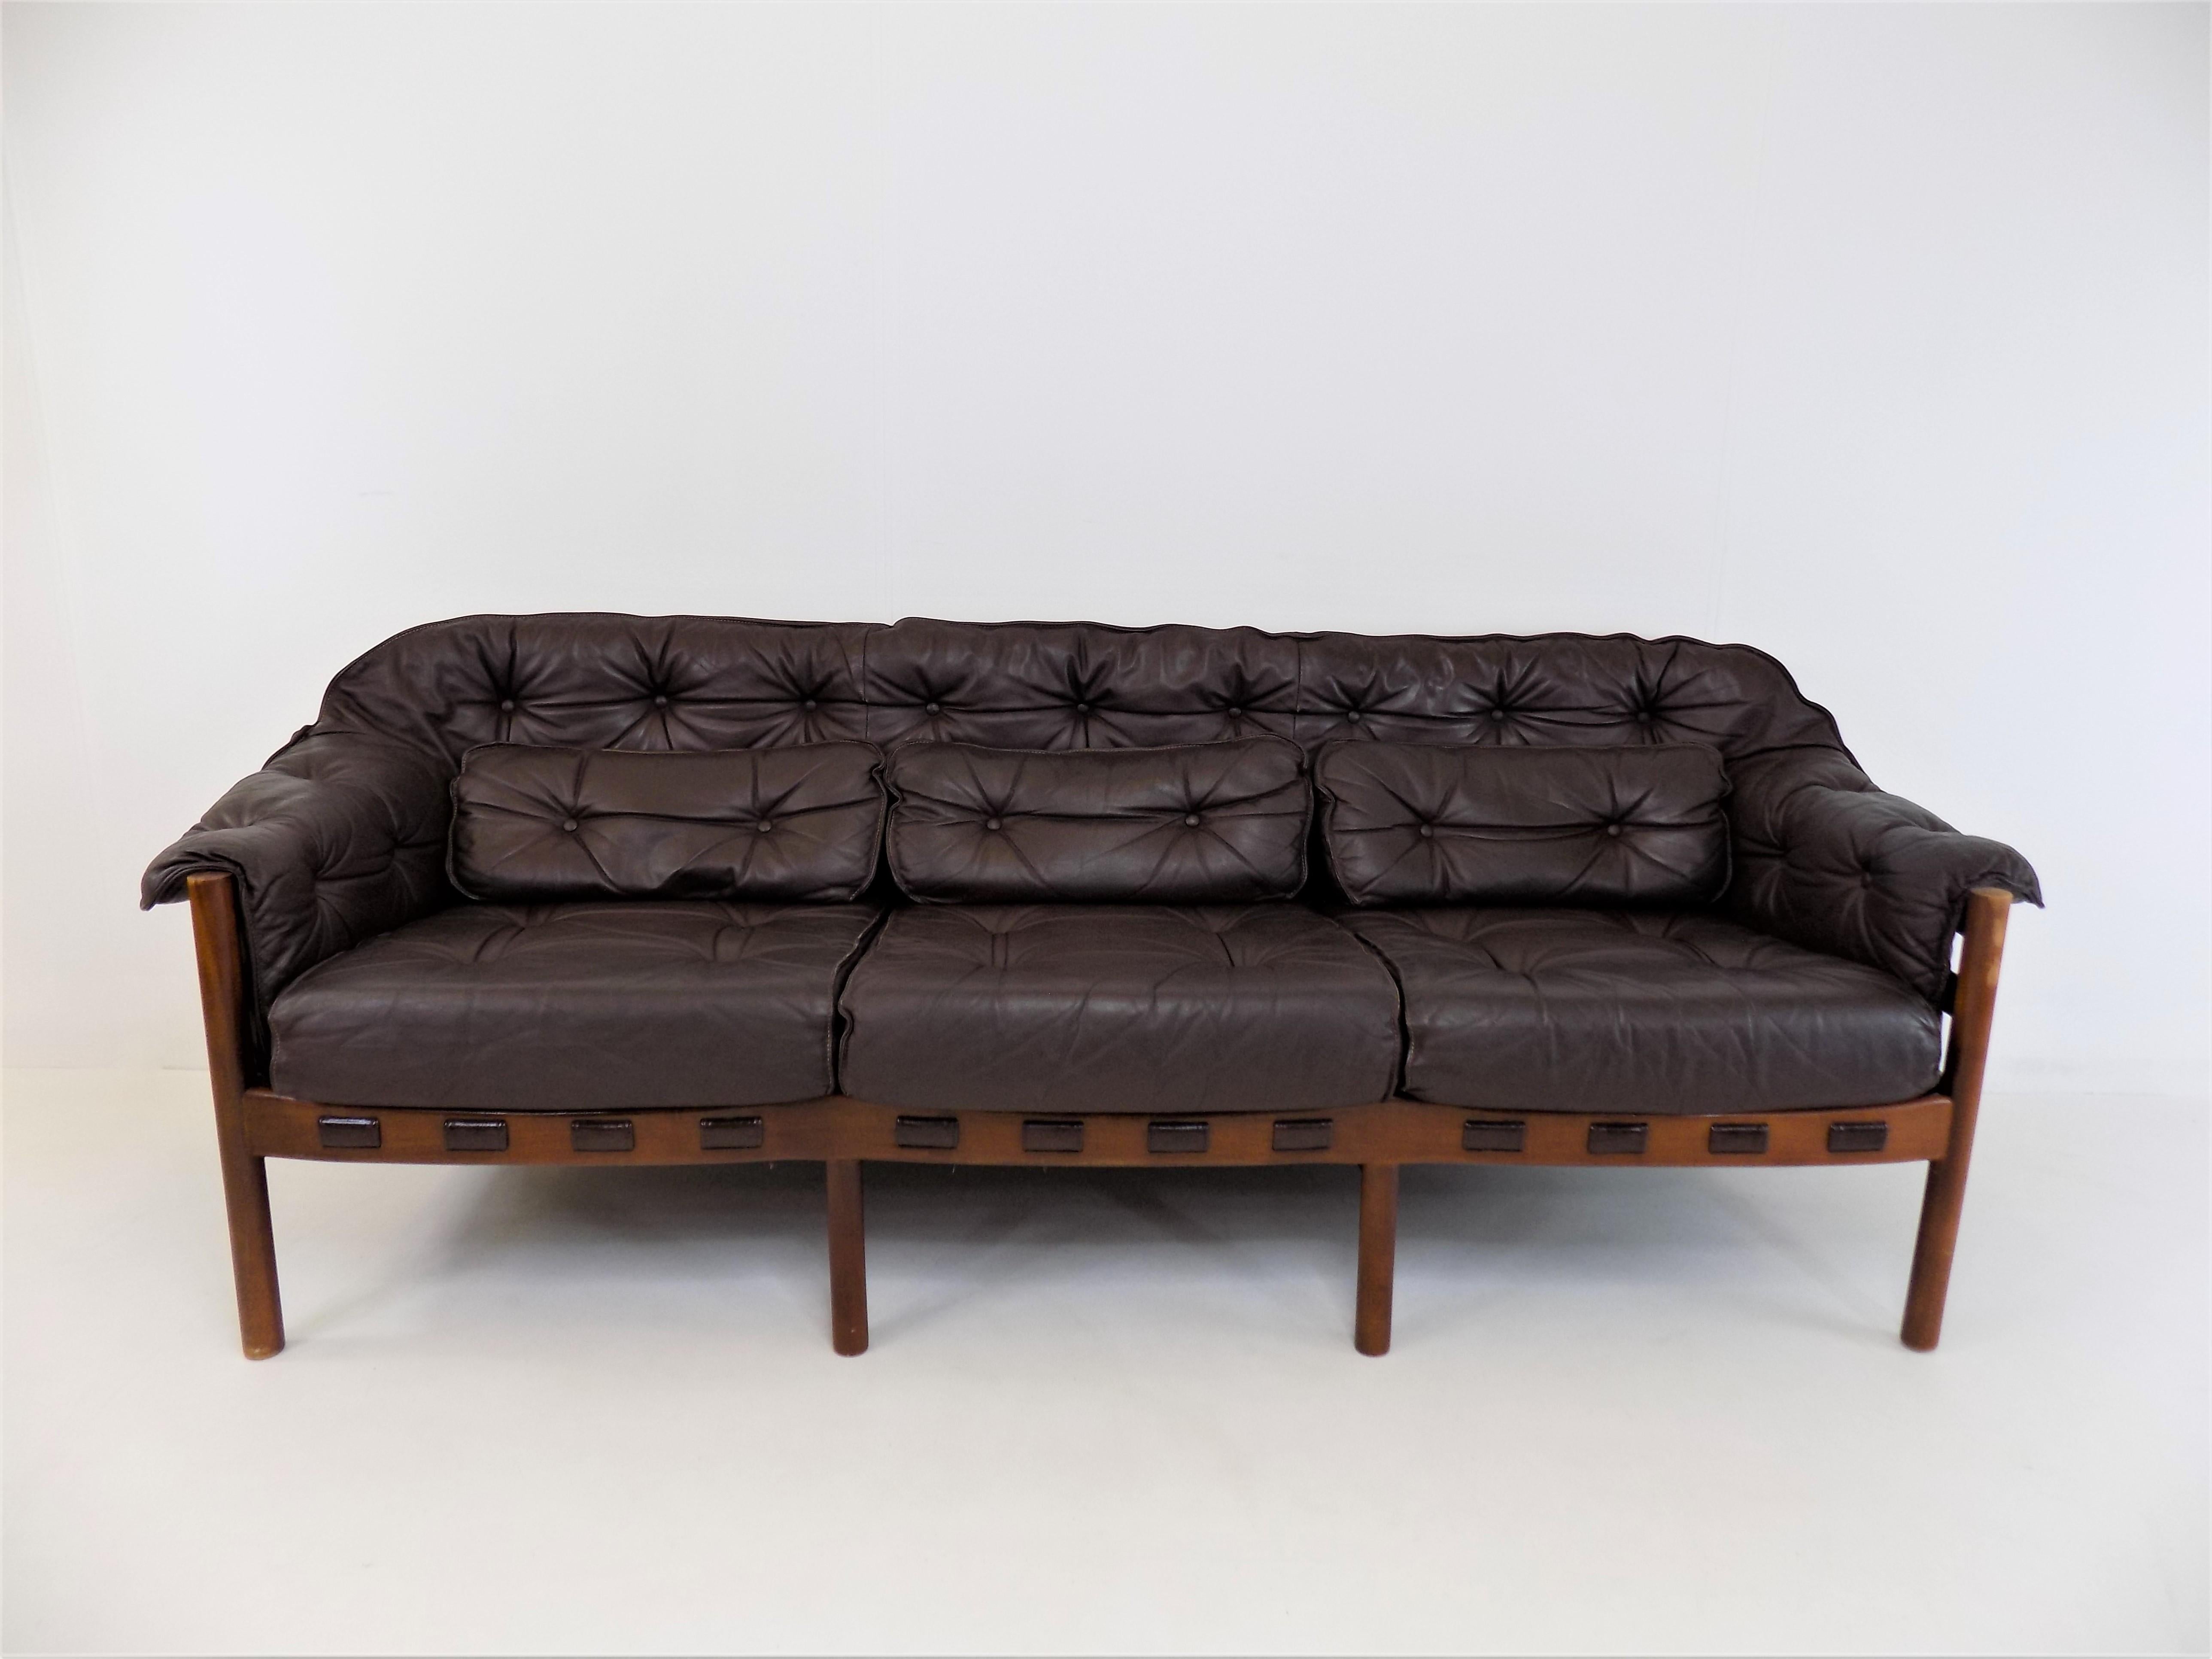 Excellent condition 3 seater leather sofa by the Swedish designer Sven Ellekaer. The chocolate brown leather is in excellent condition. The wooden frame has a beautiful color that harmonises with the leather and shows minimal signs of wear. The